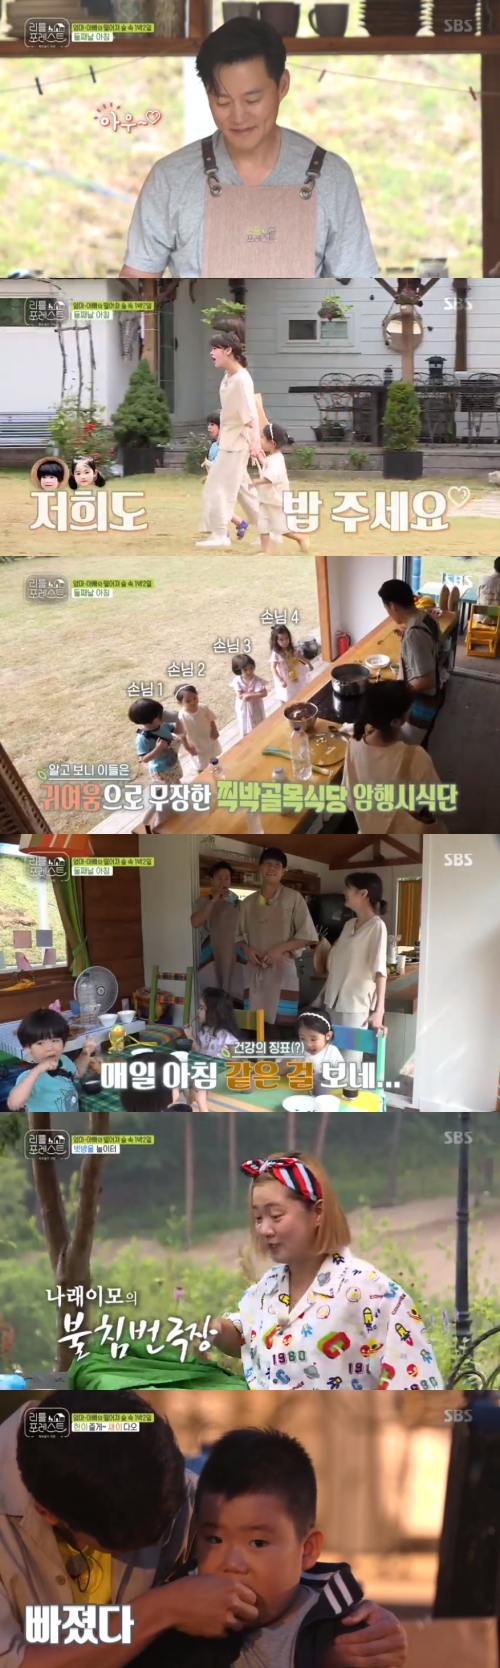 The first night and two days with Little Forest ended.On the 20th, SBS entertainment program Little Forest was drawn on the second morning.On this day, Little was busy eating blueberries ahead of breakfast.Lee Seung-gi limited the number of blueberries to 10 in the morning to Lee Hyun-yi and laughed at other Little Lees mouth.Lee Seung-gi and Lee Seo-jin prepared breakfast while Jung So-min took care of Little.The breakfast menu that Lee Seo-jin had to worry about the night before was set as beef soup, Kim Jin-gyun Kimbap, and mackerel grilled.Fortunately, Little Lee inhaled Lee Seo-jins menu deliciously, but even Kim Jin-gyun Kimbap was big for Little Lee.When Eugene whined, How can I give you a long one?, the carers laughed at Kim Jin-gyun Kimbap with scissors.The ordering was also drawn during Littles meal: Eugenei and Lee Hyun-yi claimed they were four, and Grace proudly stated that she was five.The eldest brother, seven years old, looked at his sisters cute.Meanwhile, Lee Seung-gi was Super Wings straight to the toilet in the news of Lee Hyun-yis stool.Lee Seung-gi solved Lees stool and laughed, saying, I see the same thing every morning. Lee Seo-jin laughed, saying, It is a spokesman for Little Forest, Seunggi.Then came news for Lee Hyun-yi, who took over as the official spokesman, sensing the ideal straight away: Lee Seung-gi said, Lee Hyun, do you need to shit?, and when Lee Hyun-yi led the toilet, Lee Seo-jin shouted Spokesman Super Wings from behind.Park Na-rae fell asleep, and he was not able to sleep until early morning, when he was in charge of the Littles invasions during the night.The carers took over the Littles while Park Na-rae was asleep, so that Park Na-rae could sleep comfortably.After waking up, Park Na-rae appeared with a swollen face and told what happened during the night.It started with Lee Hyun-yis sleep, and an hour later Brookes Pippi notification, Lee Hyun-yi woke up five times, and Lee Han asked for a change of bed.Lee Seung-gi said, I was lying down like I was hit by Tyson and K.O. He recalled Park Na-raes morning and laughed.Lee Seo-jin pointed to Lee Seung-gi and explained that two times only in the morning of the spokesman and that Park Na-rae was not alone.Meanwhile, a sudden rain fell in the woods, and Littles, dressed in raincoats, went out in the rain and caught the attention.Brooke was suddenly baptized and had a strong smile on the carers.After that, a great debate on Lee Han-is drawing of this drawing took place, and when Lee Han was afraid to draw this shaking, Brooke and Grace persuaded him that if he did not pull his teeth, he would have a tooth and it hurt.Lee Seung-gi asked, If you ask Brooke to pick it, will you pick it?But Brooke said, No, no, no, and she refused.In the end, Lee Seung-gi took over Lee Seung-gi, who touched the teeth of the frightened Lee Han-i and said, How is he?I was playing with him and he was easily picked up and pleased with Lee.Littles were then pictured meeting their parents and returning. Littles shared their first farewell with the carers and left.Next week, I was expecting to see the new Littles joining.